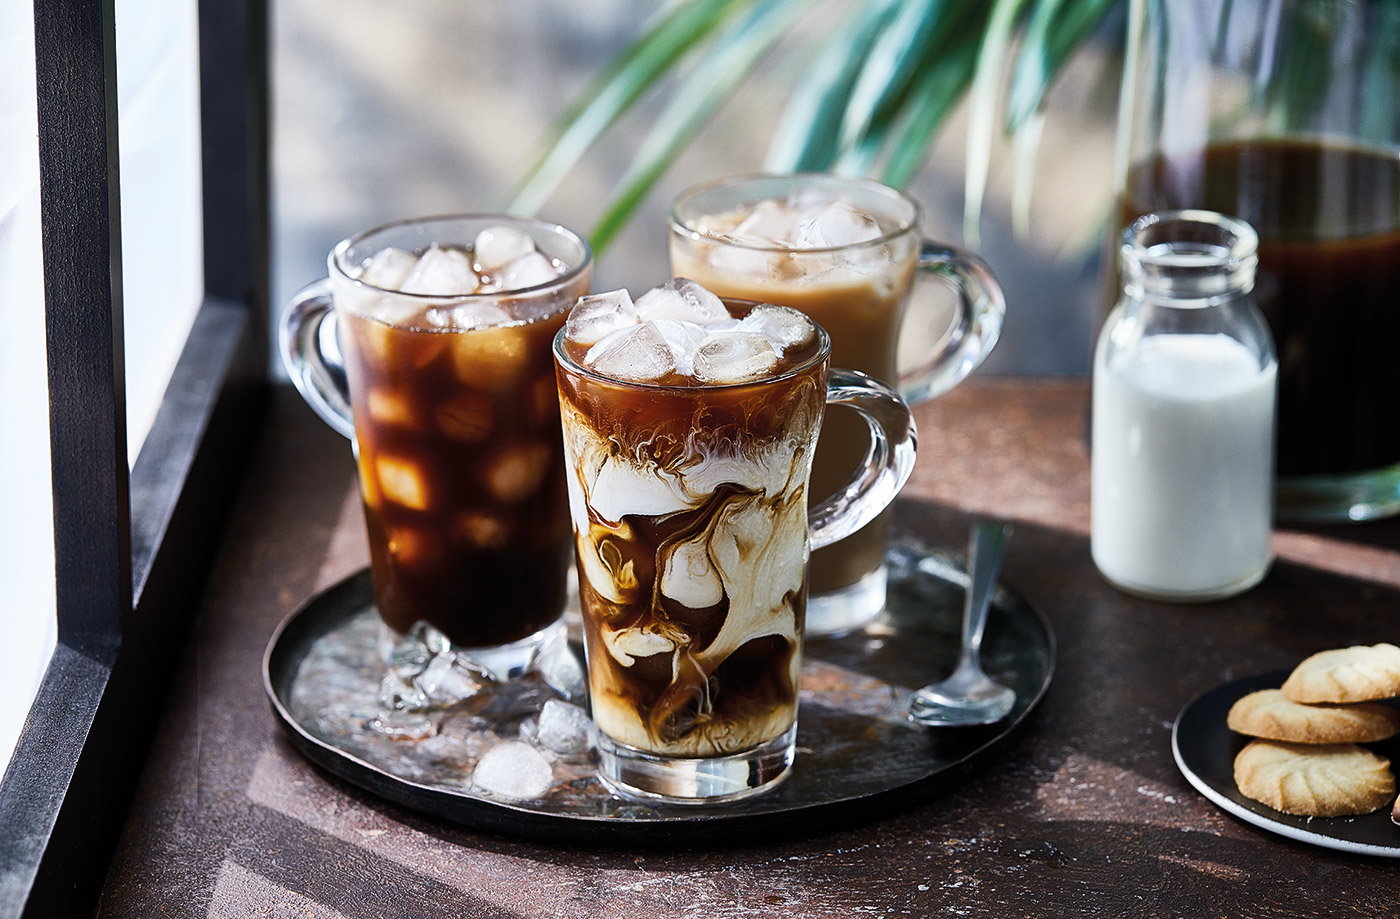 Iced Latte vs. Iced Coffee: Choose Your Drink!